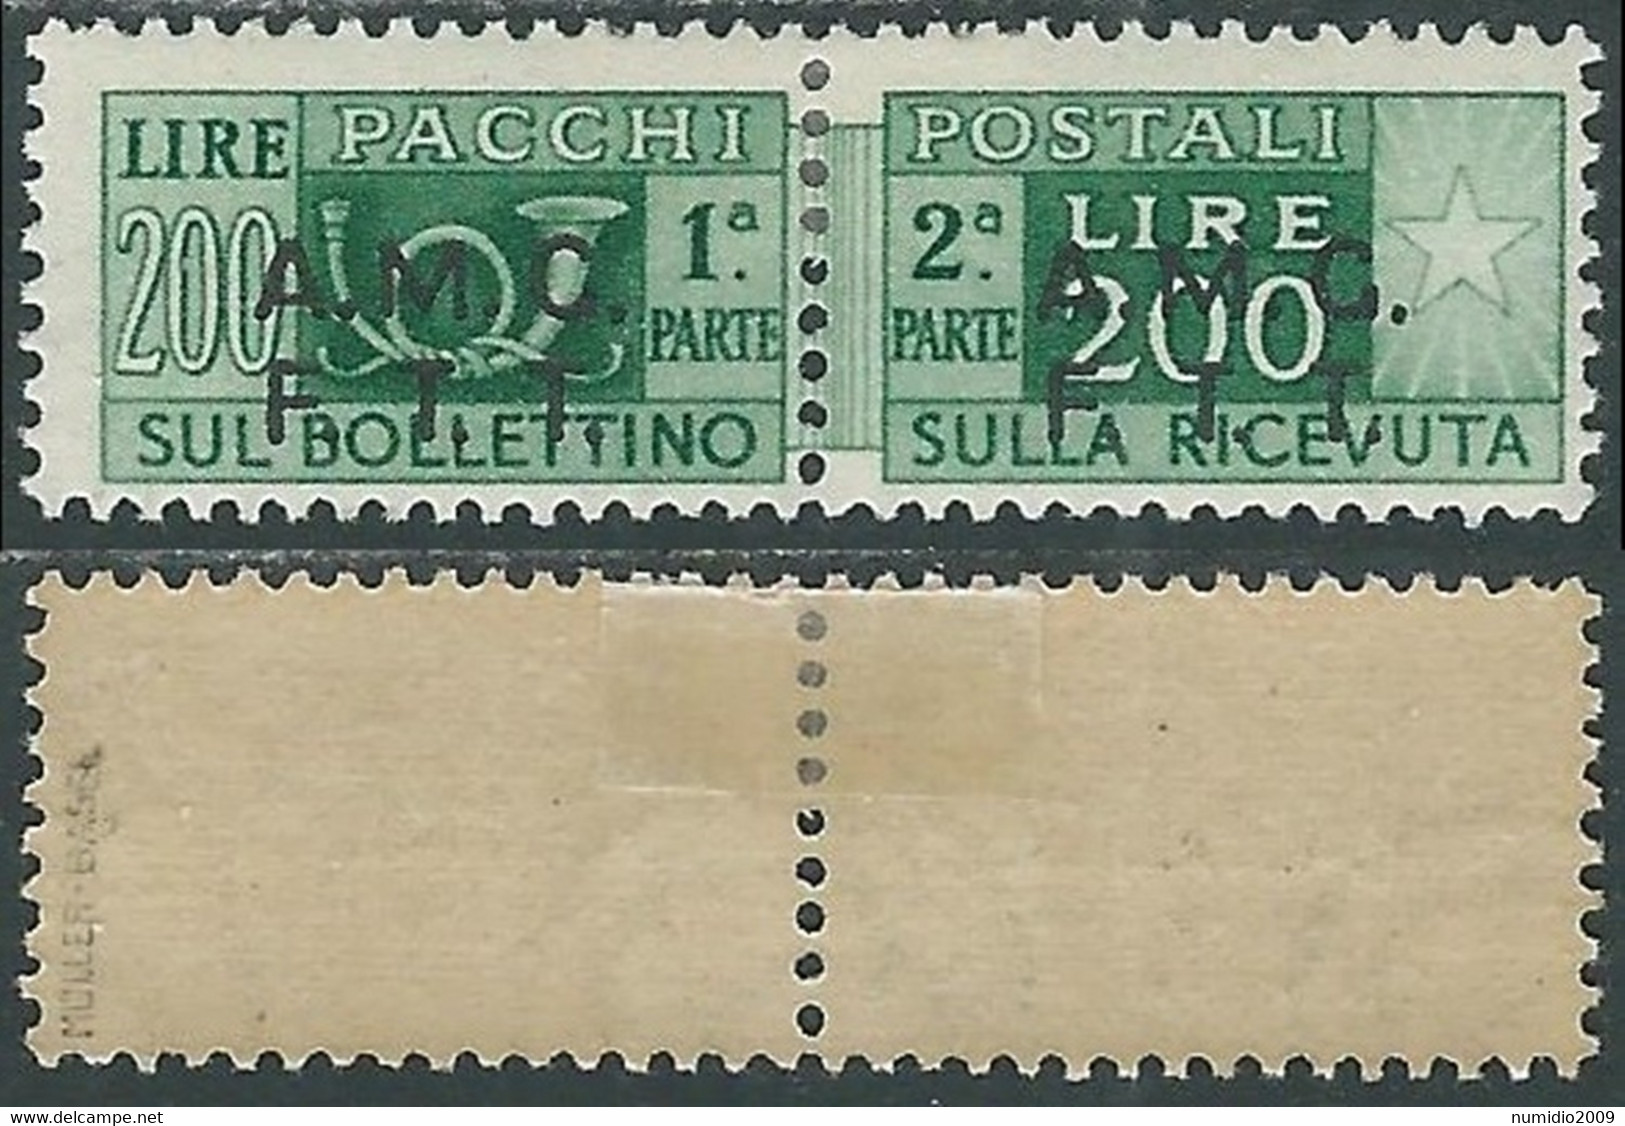 1947-48 TRIESTE A PACCHI POSTALI 200 LIRE MH * - P49 - Postal And Consigned Parcels